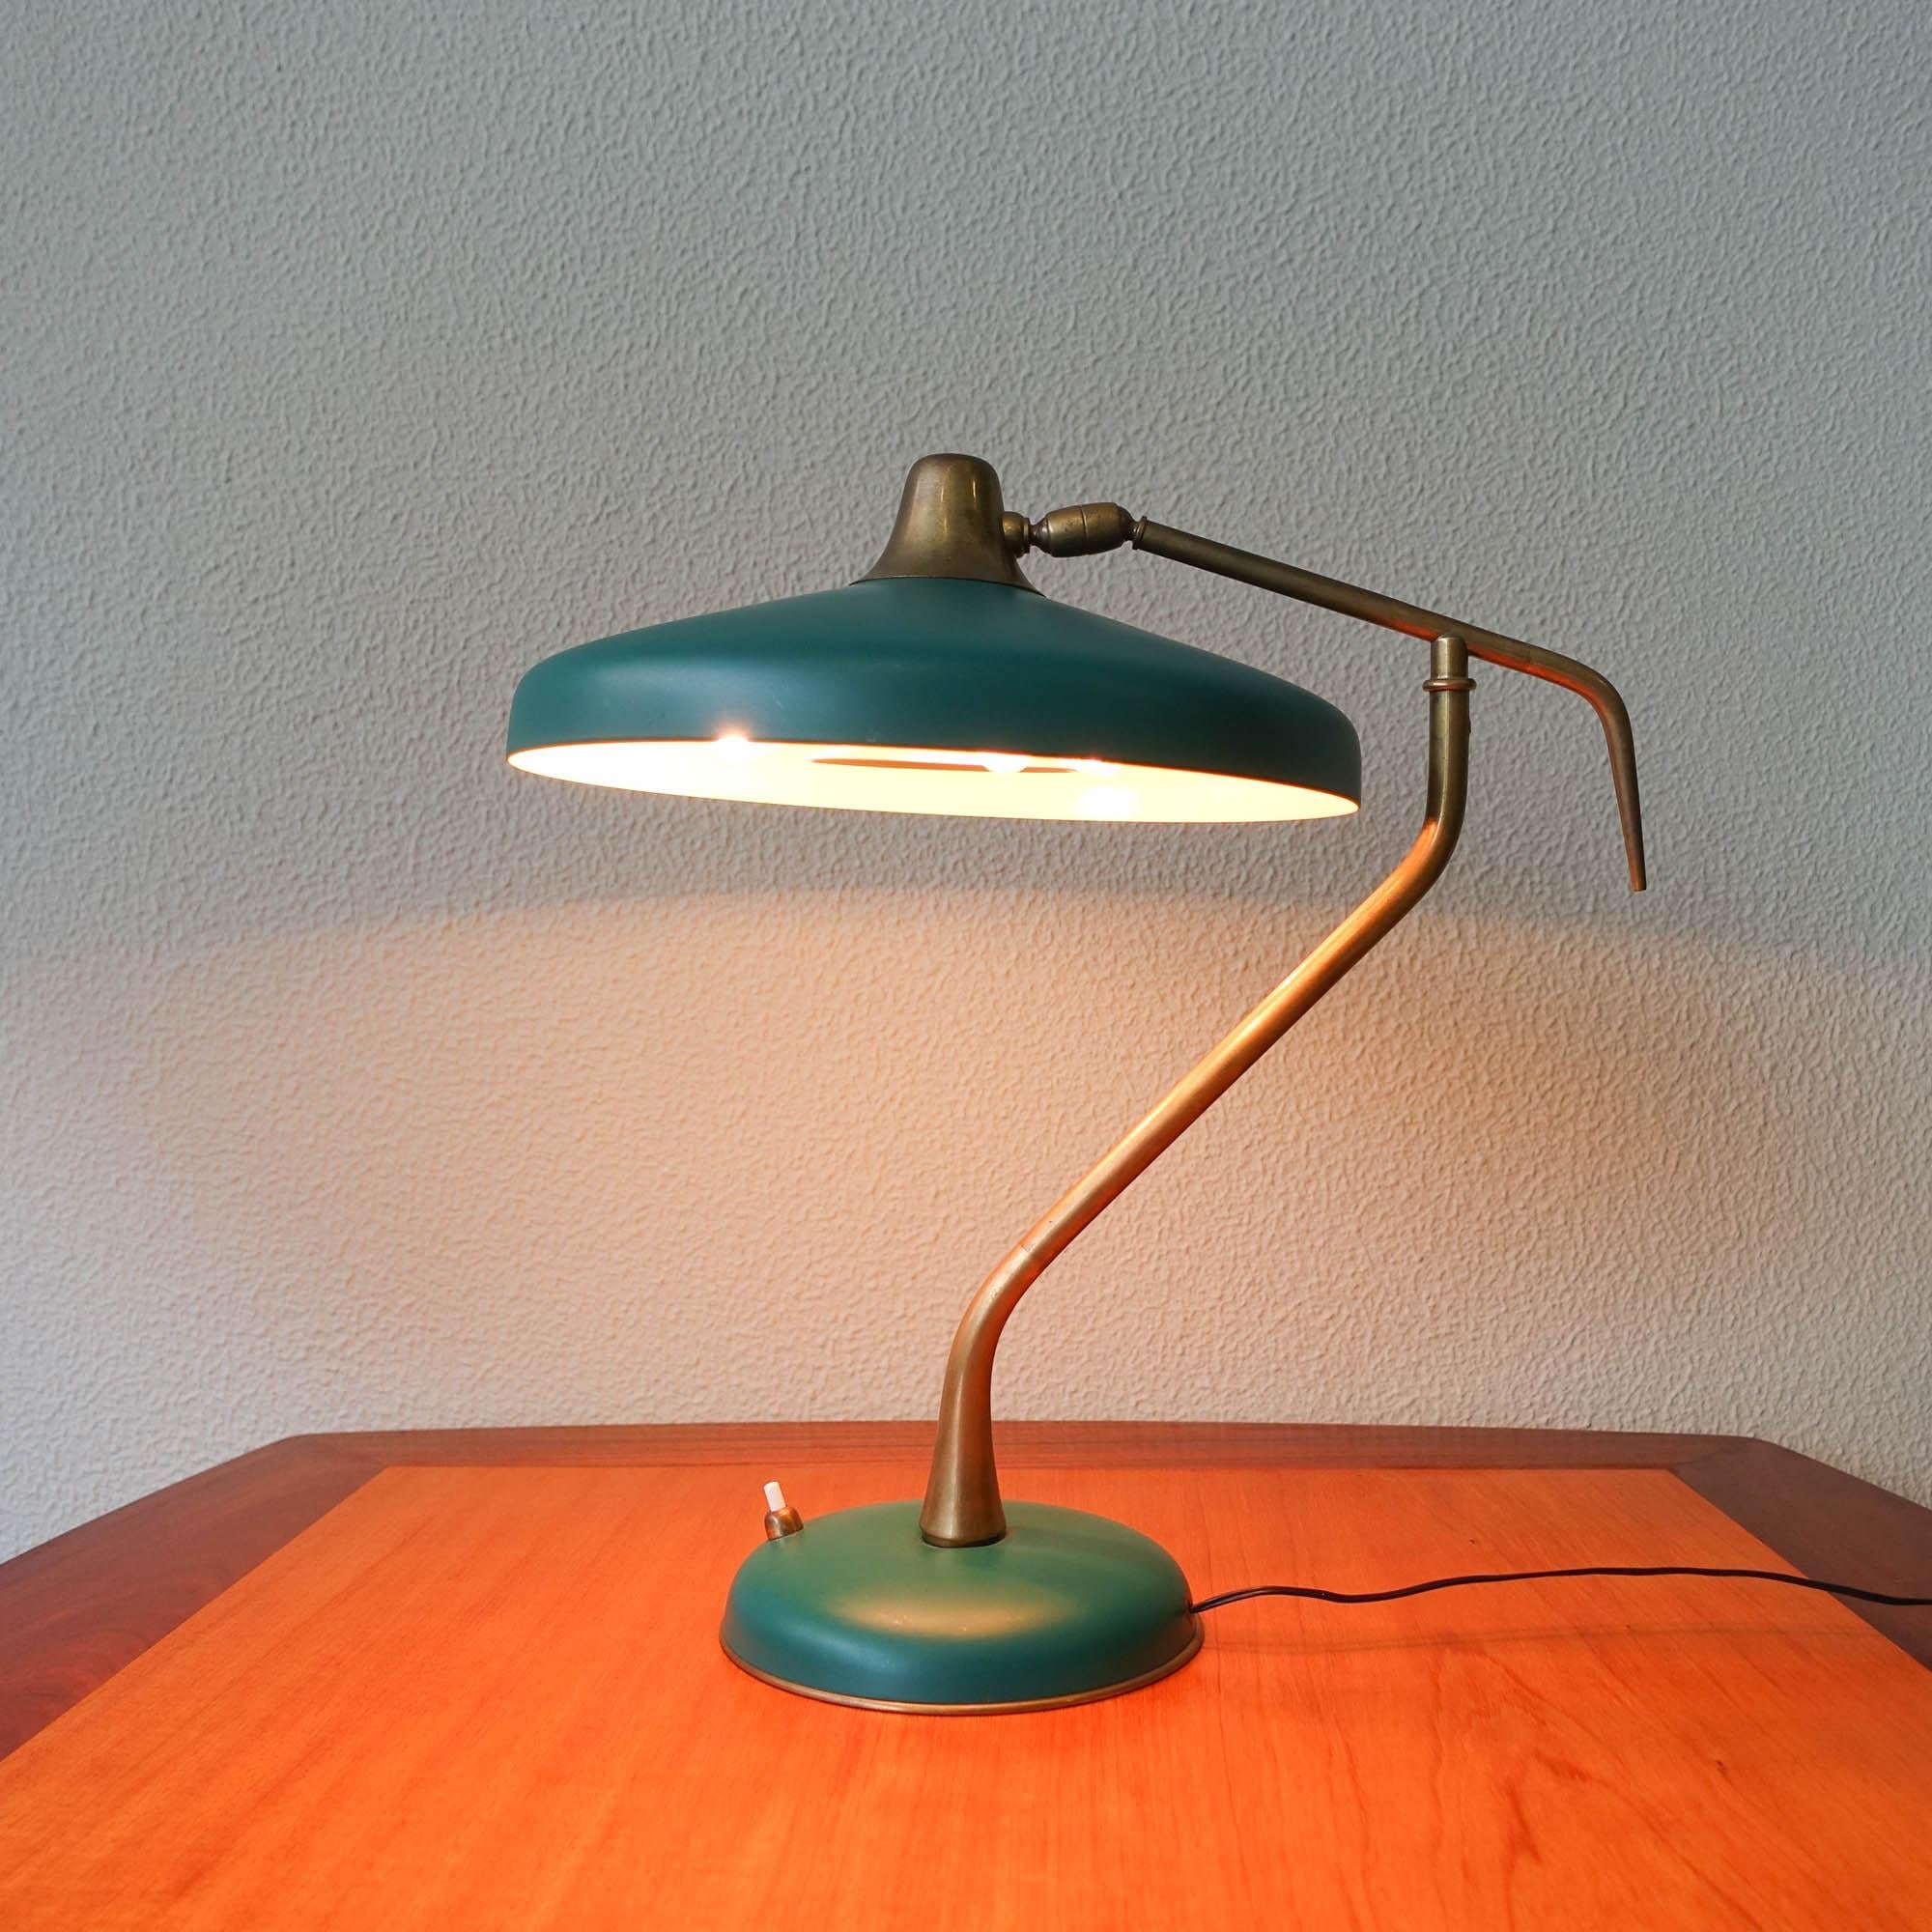 This table lamp was designed by Oscar Torlasco, for Lumi, in Italy, during the 1950's. It's the model 331, with rare brass and lacquered green aluminum. With triple light bulbs. It is in original and very good condition.